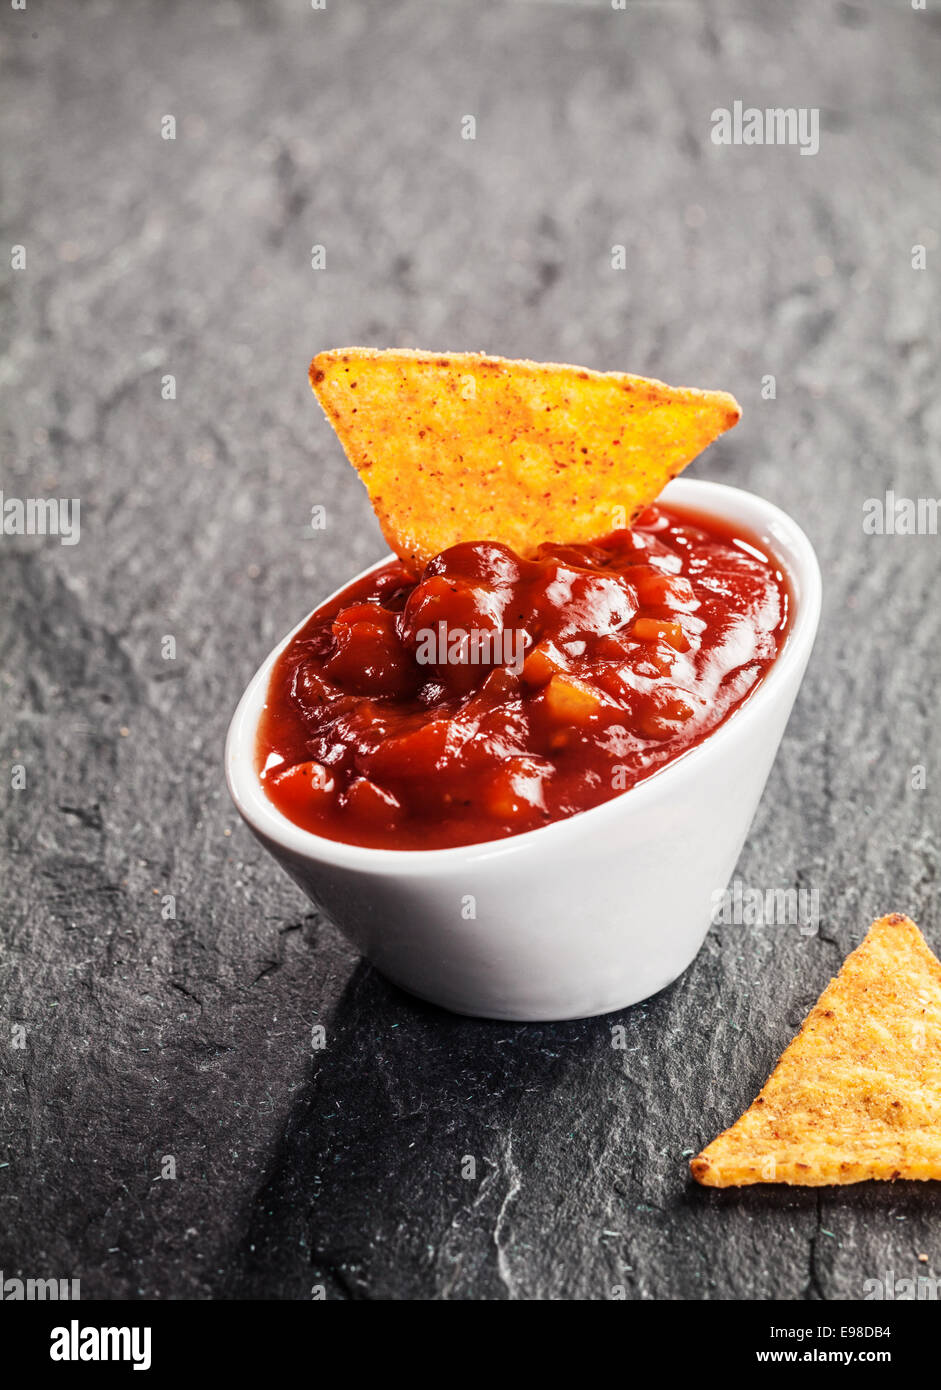 Spicy hot tomato and chili salsa dip in a small white ceramic bowl with a corn totilla for a tasty savory appetizer or snack Stock Photo